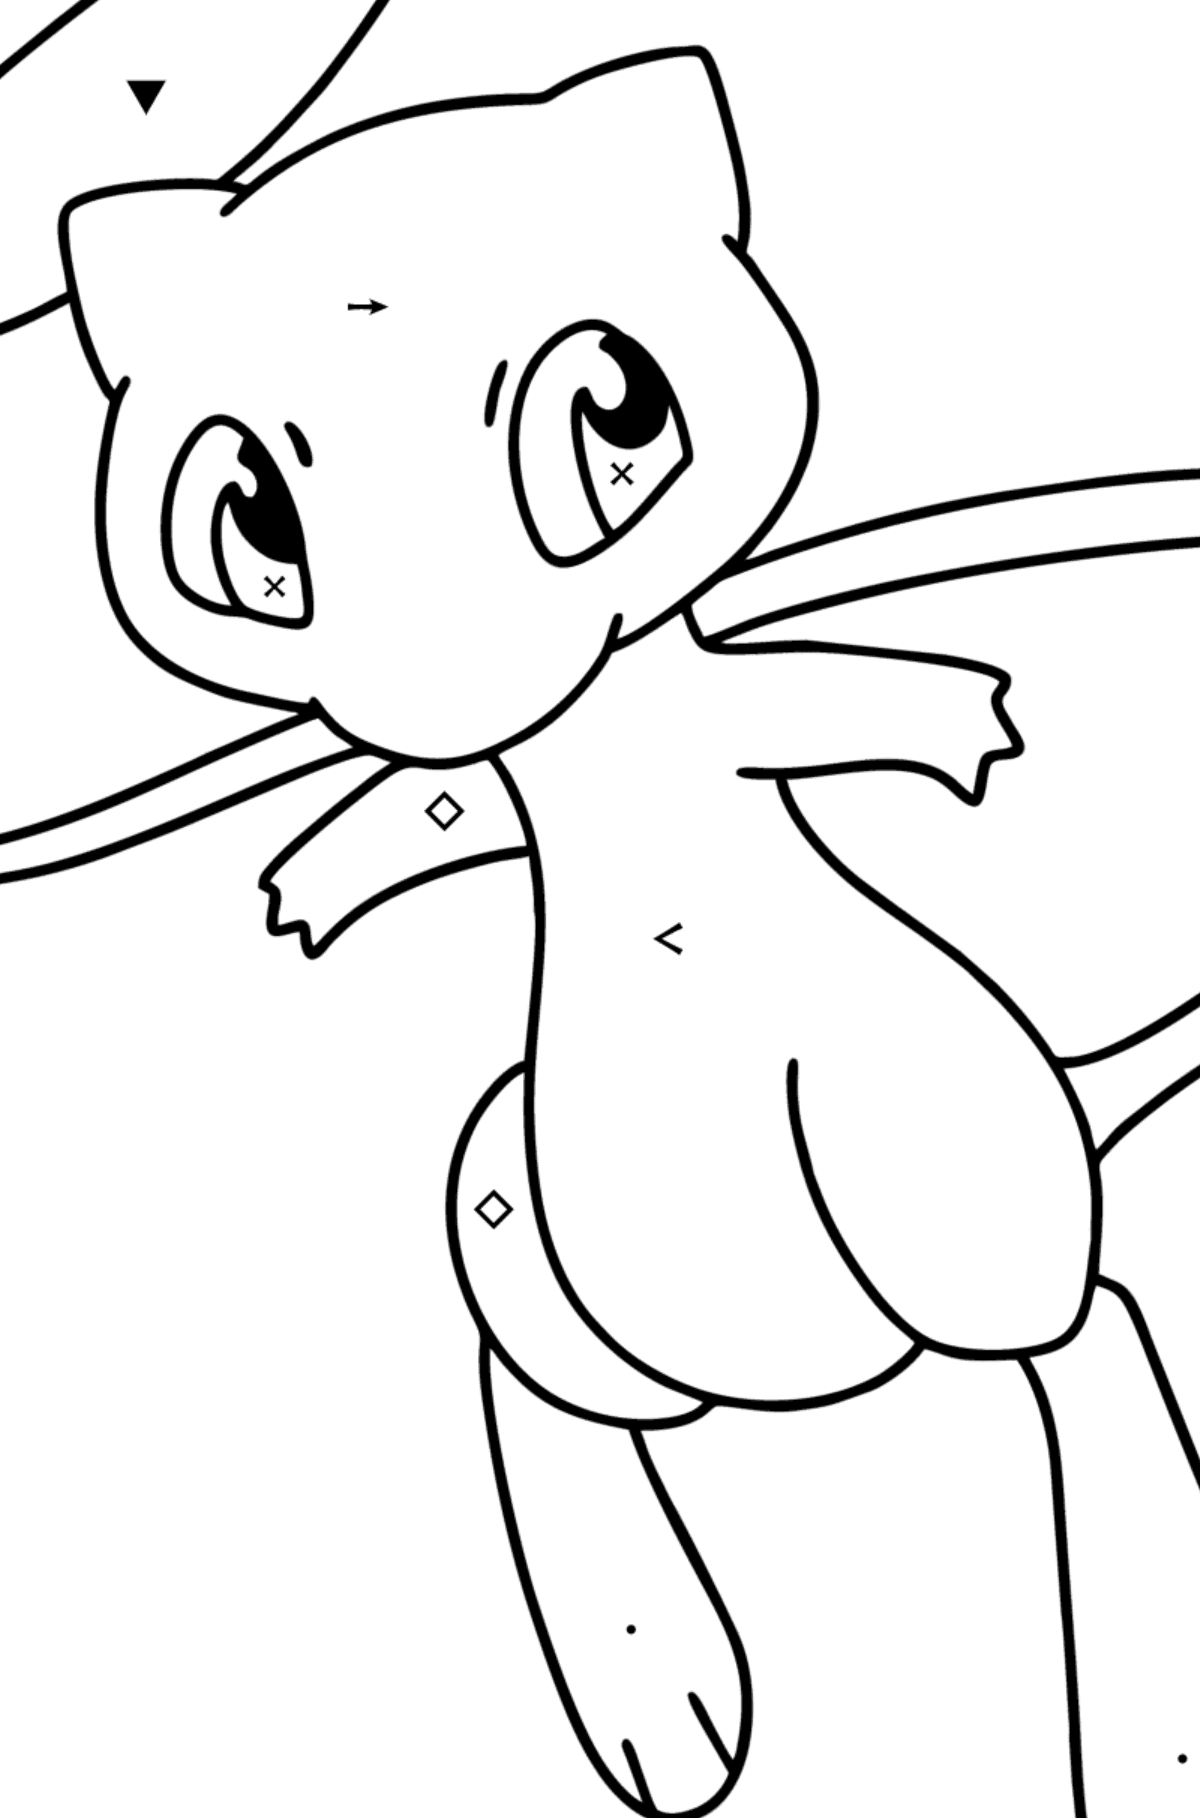 Coloring page Pokemon Go Mew - Coloring by Symbols for Kids